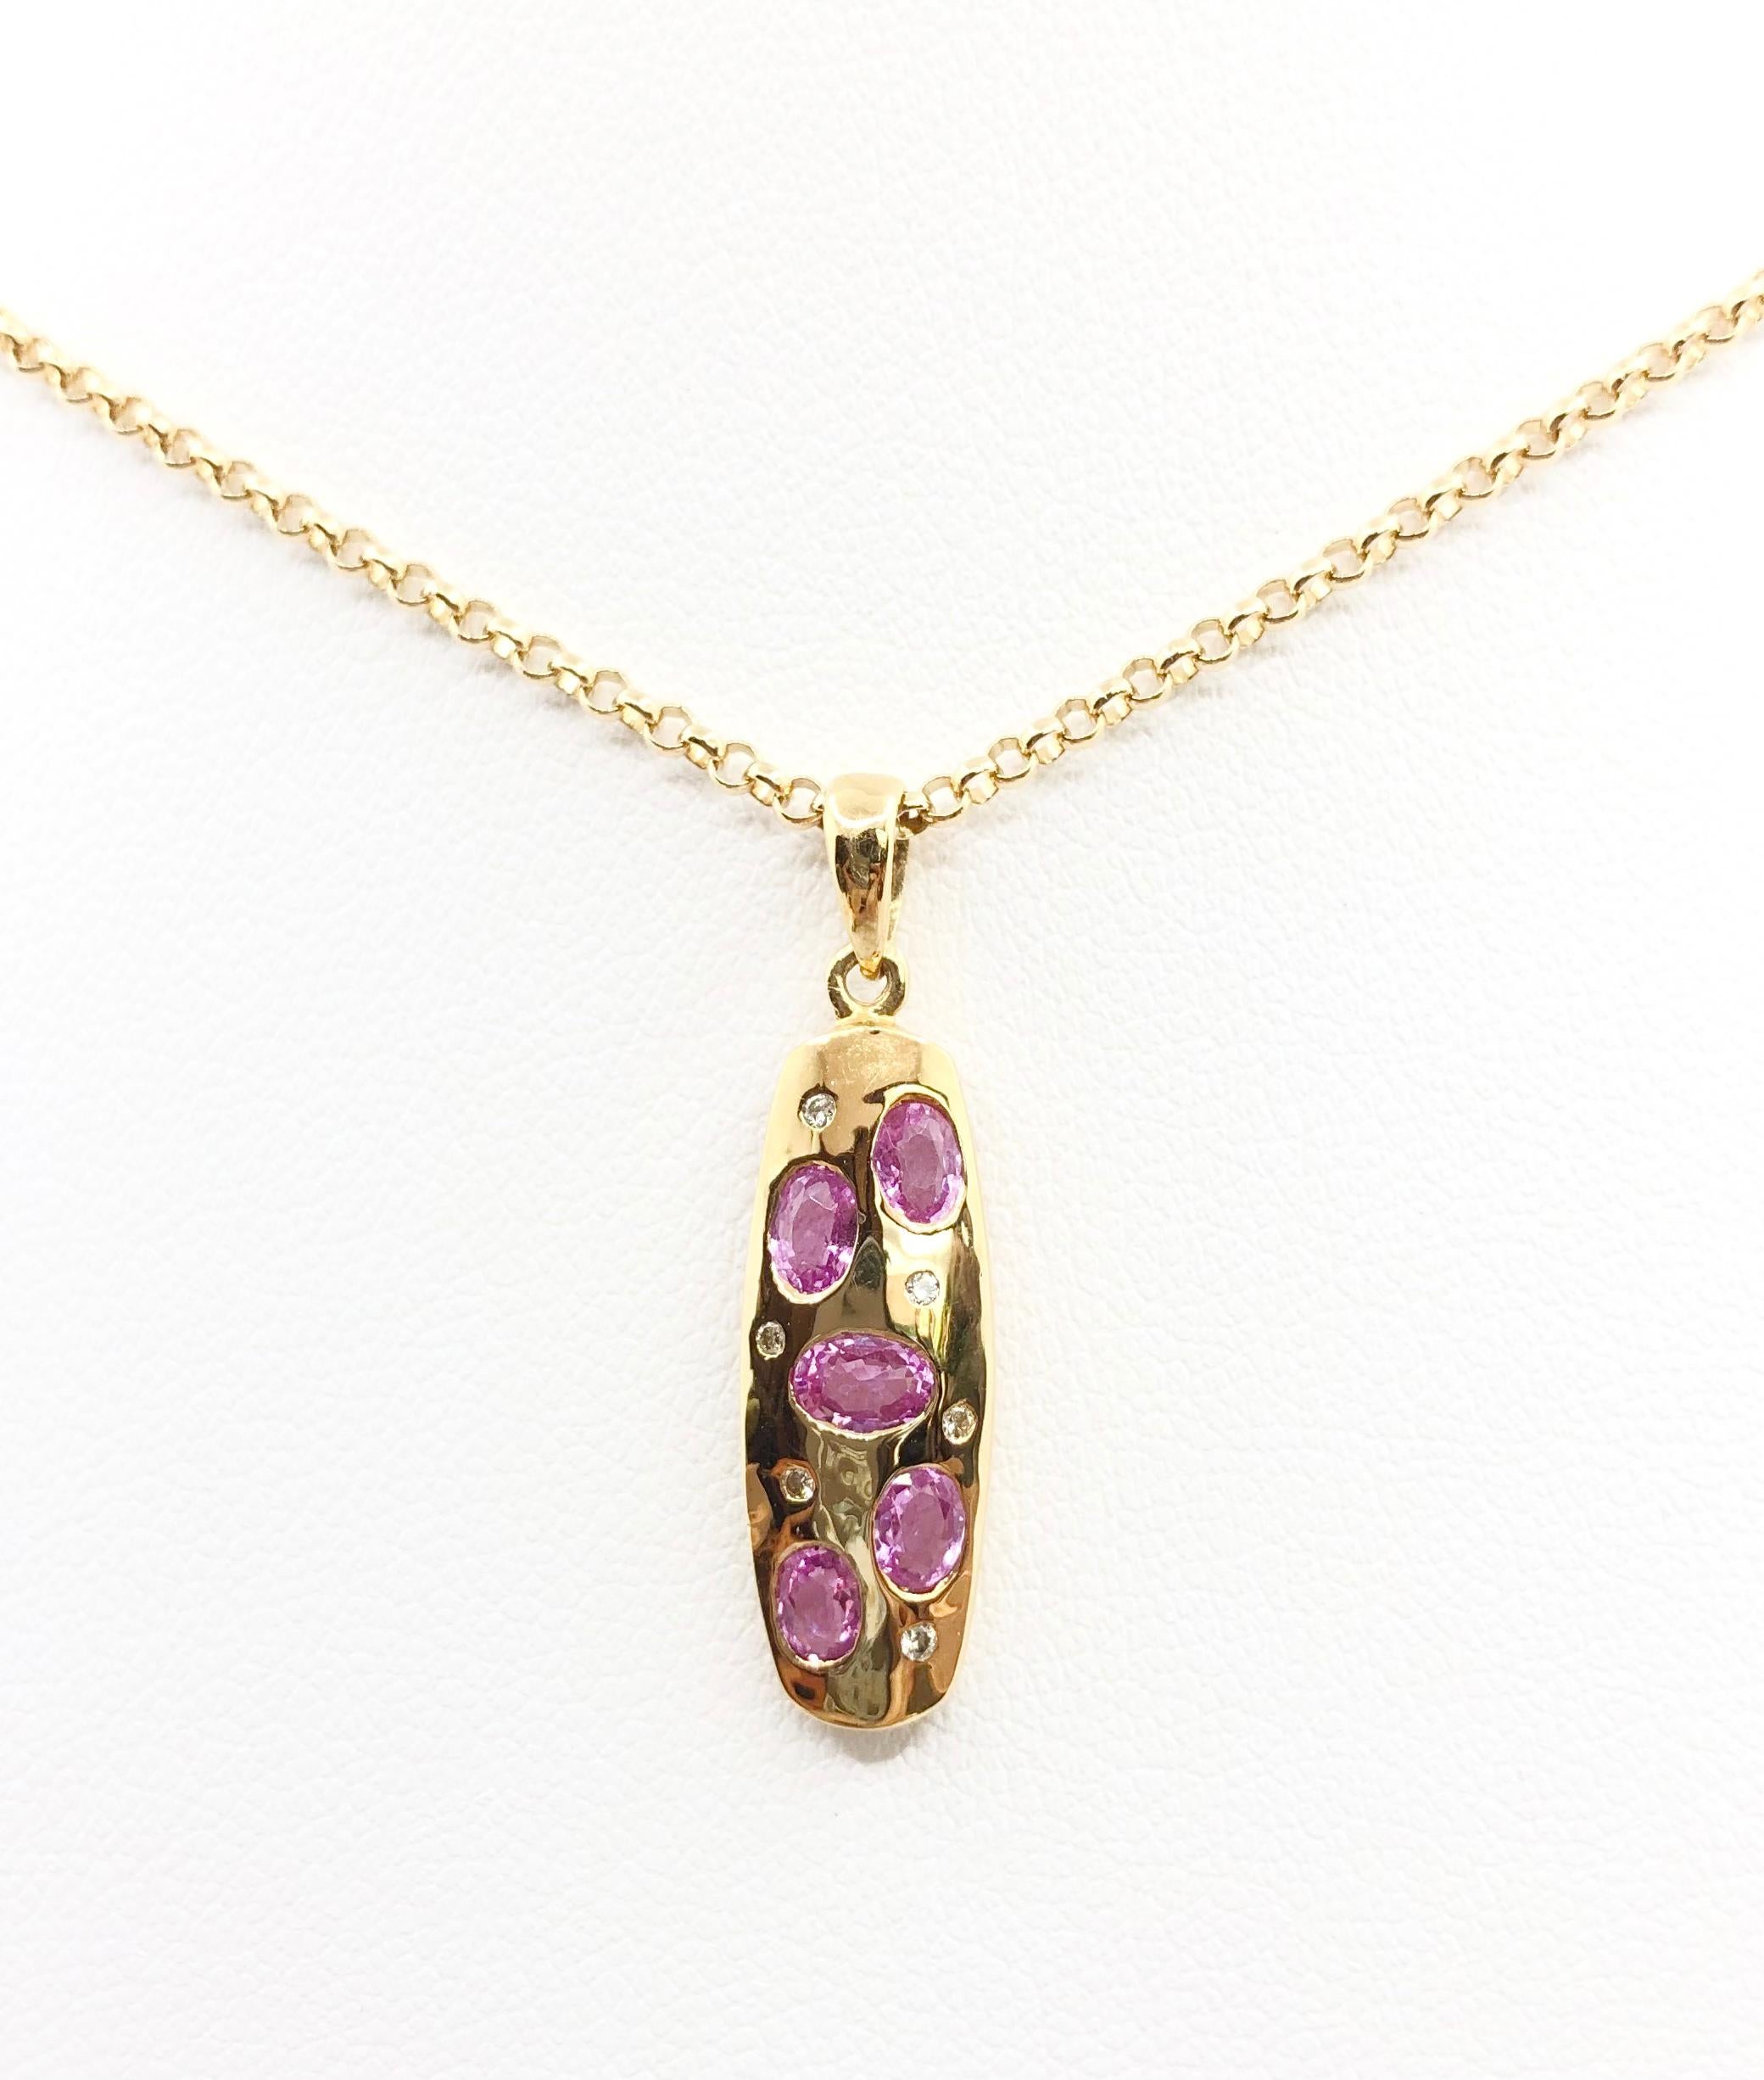 Pink Sapphire 1.08 carats with Diamond 0.05 carat Pendant set in 18 Karat Gold Settings
(chain not included)

Width: 0.8 cm 
Length: 2.9 cm
Total Weight: 2.2 grams

